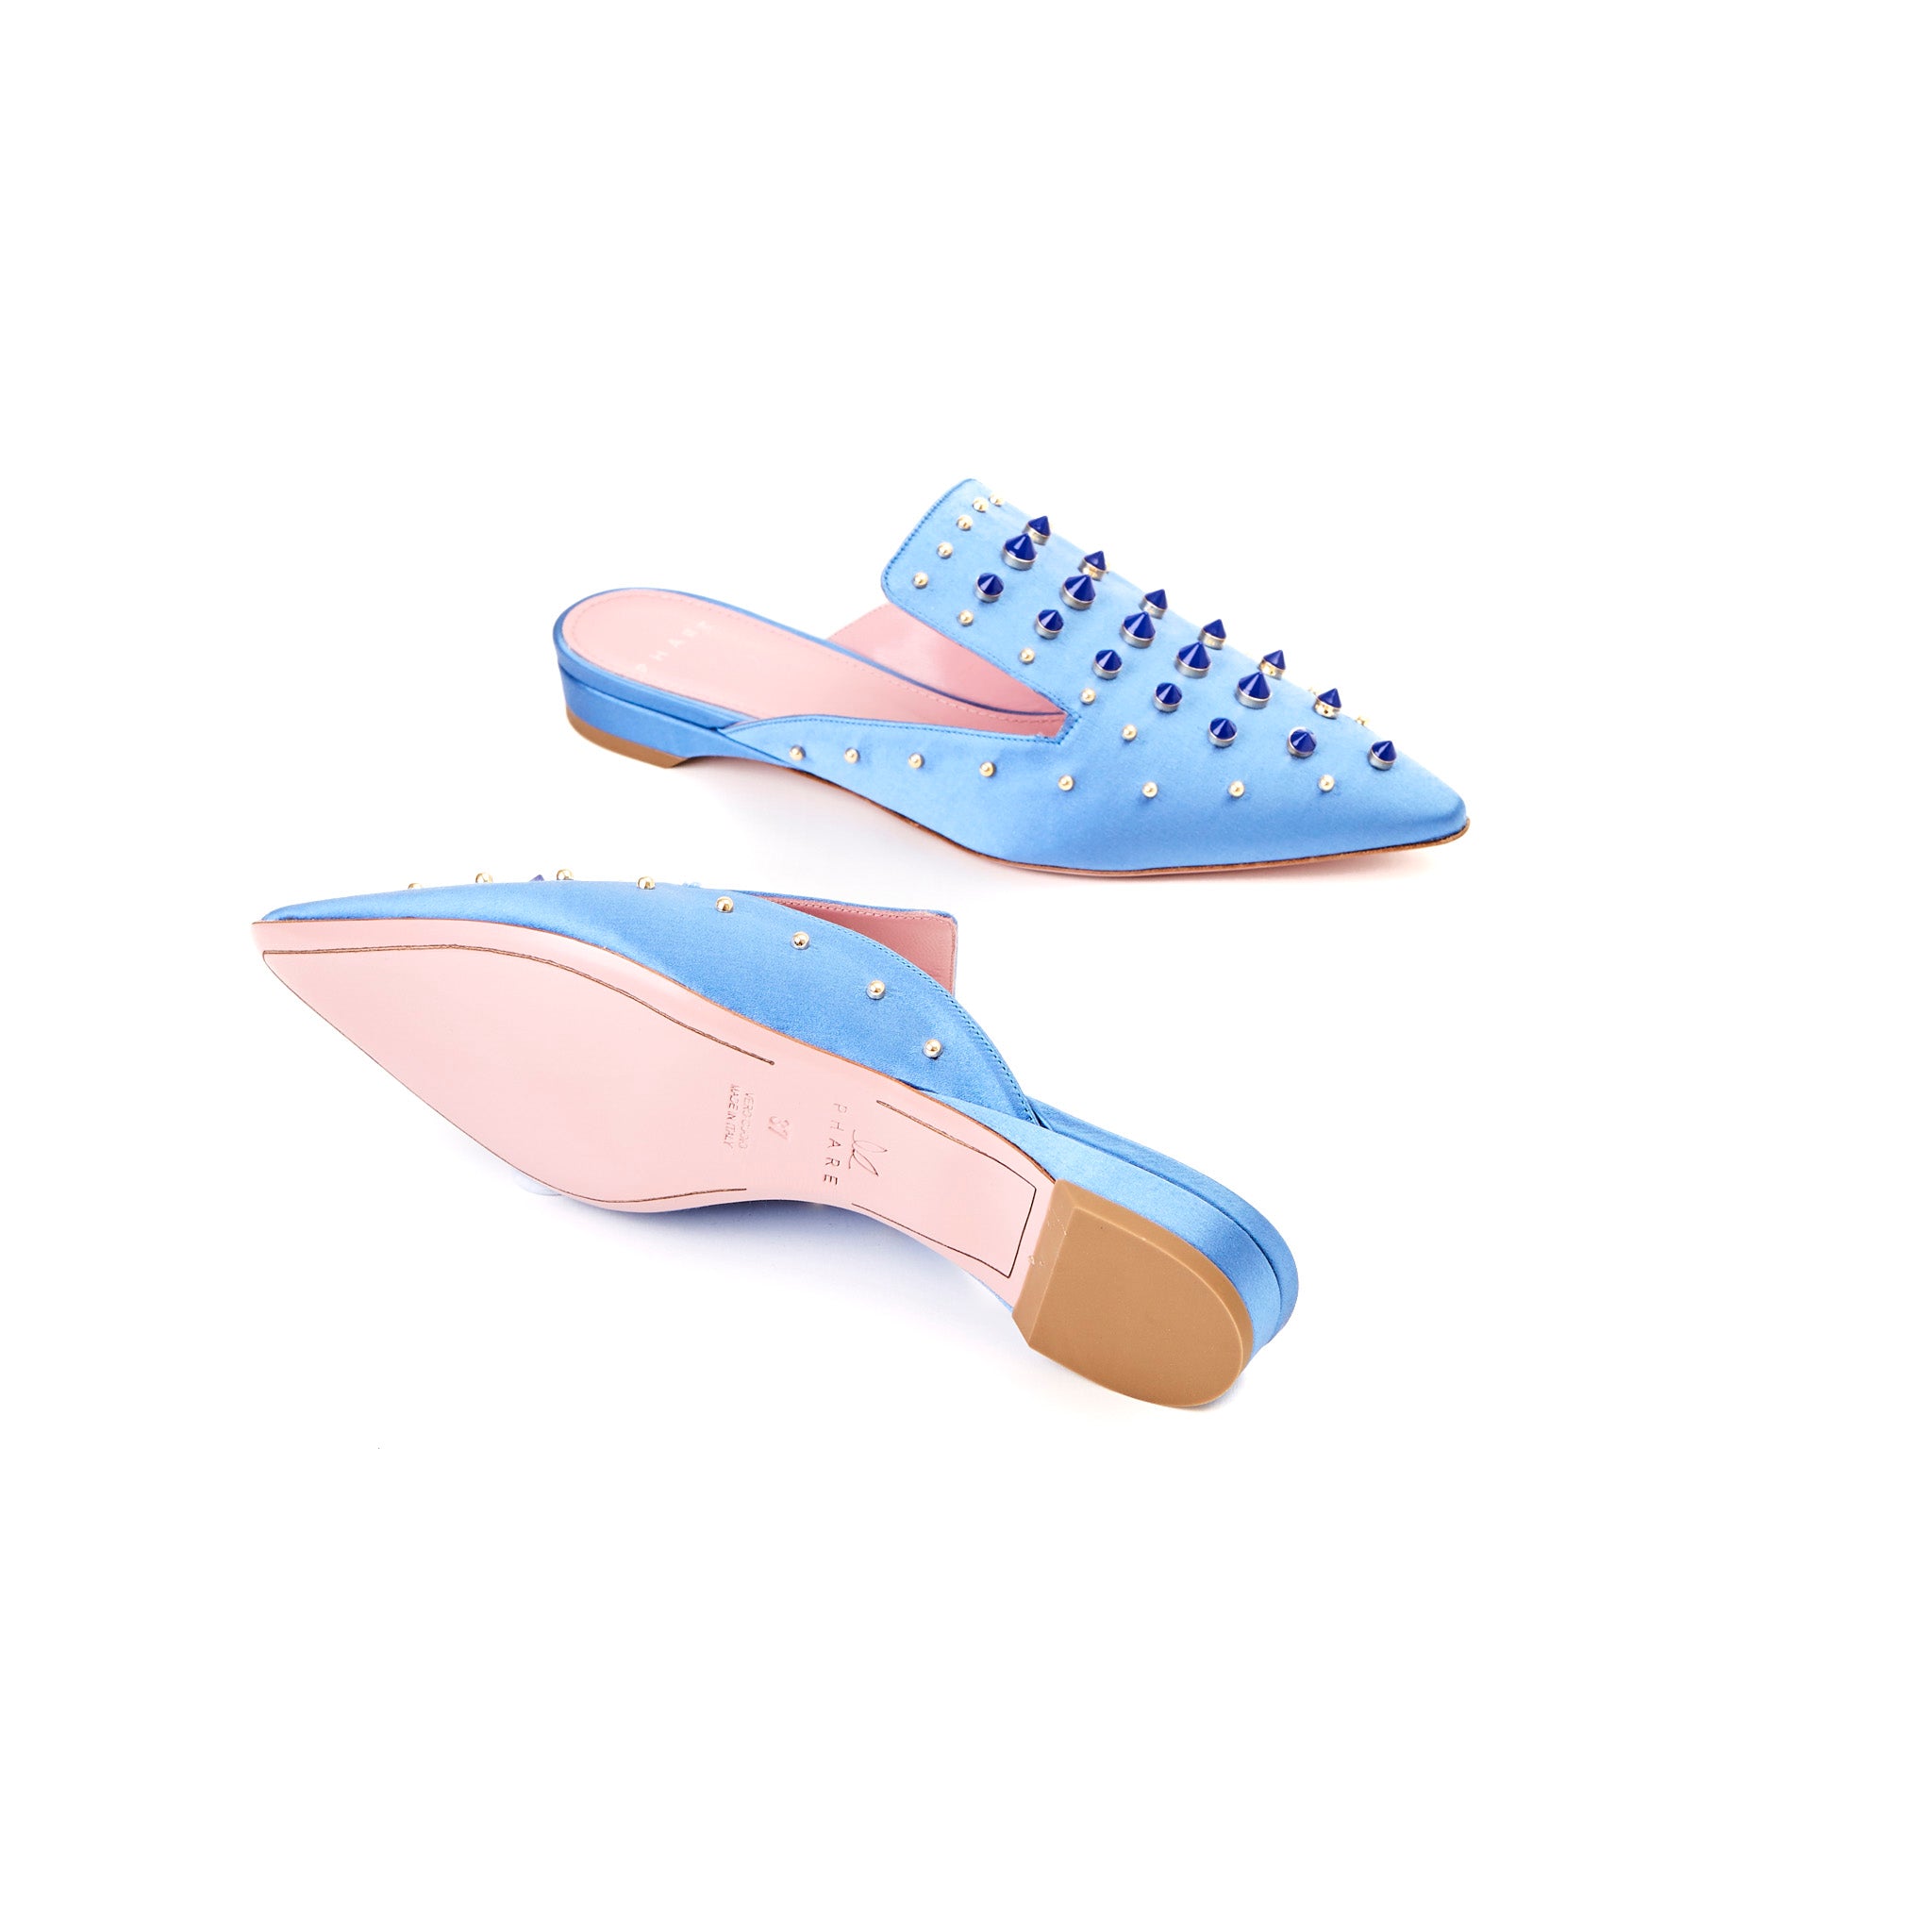 Phare Studded mule in cielo silk satin with blue and gold studs sole view 